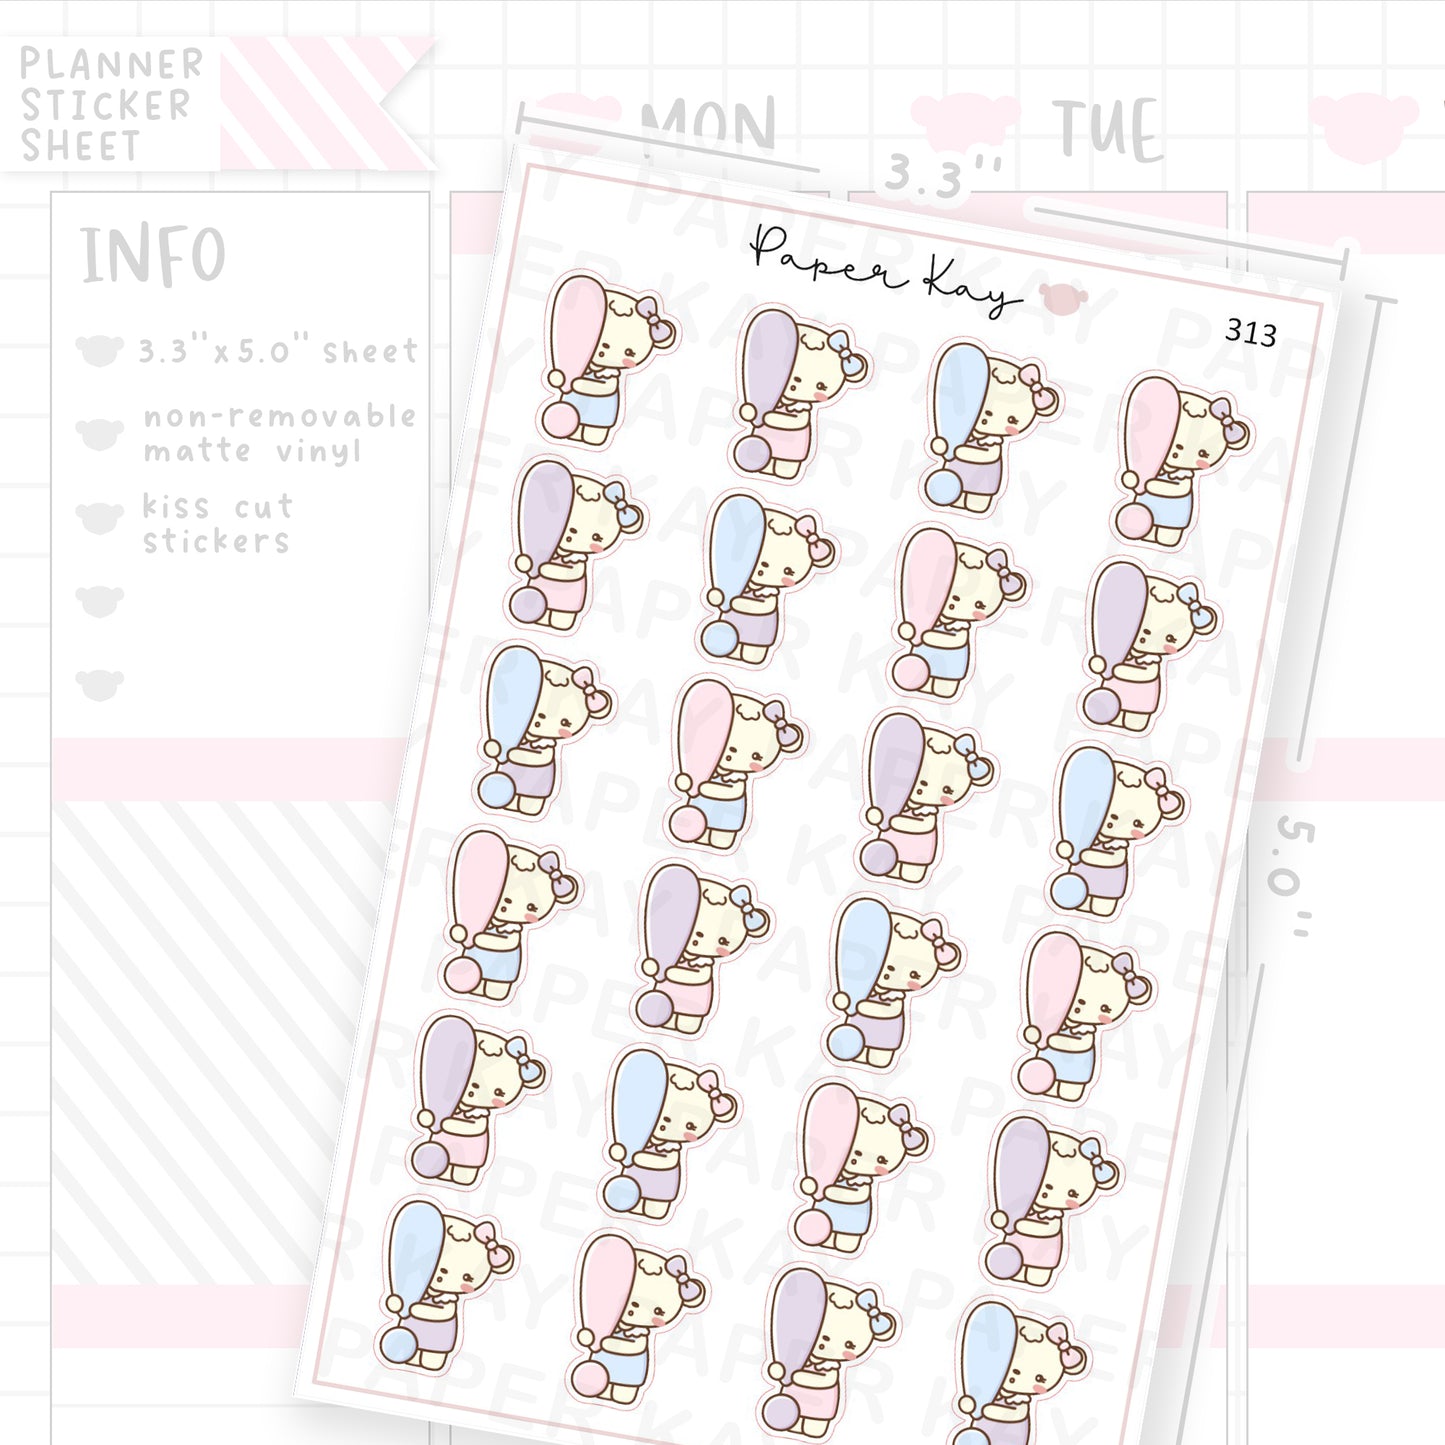 Exclamation Point Sticker Sheet